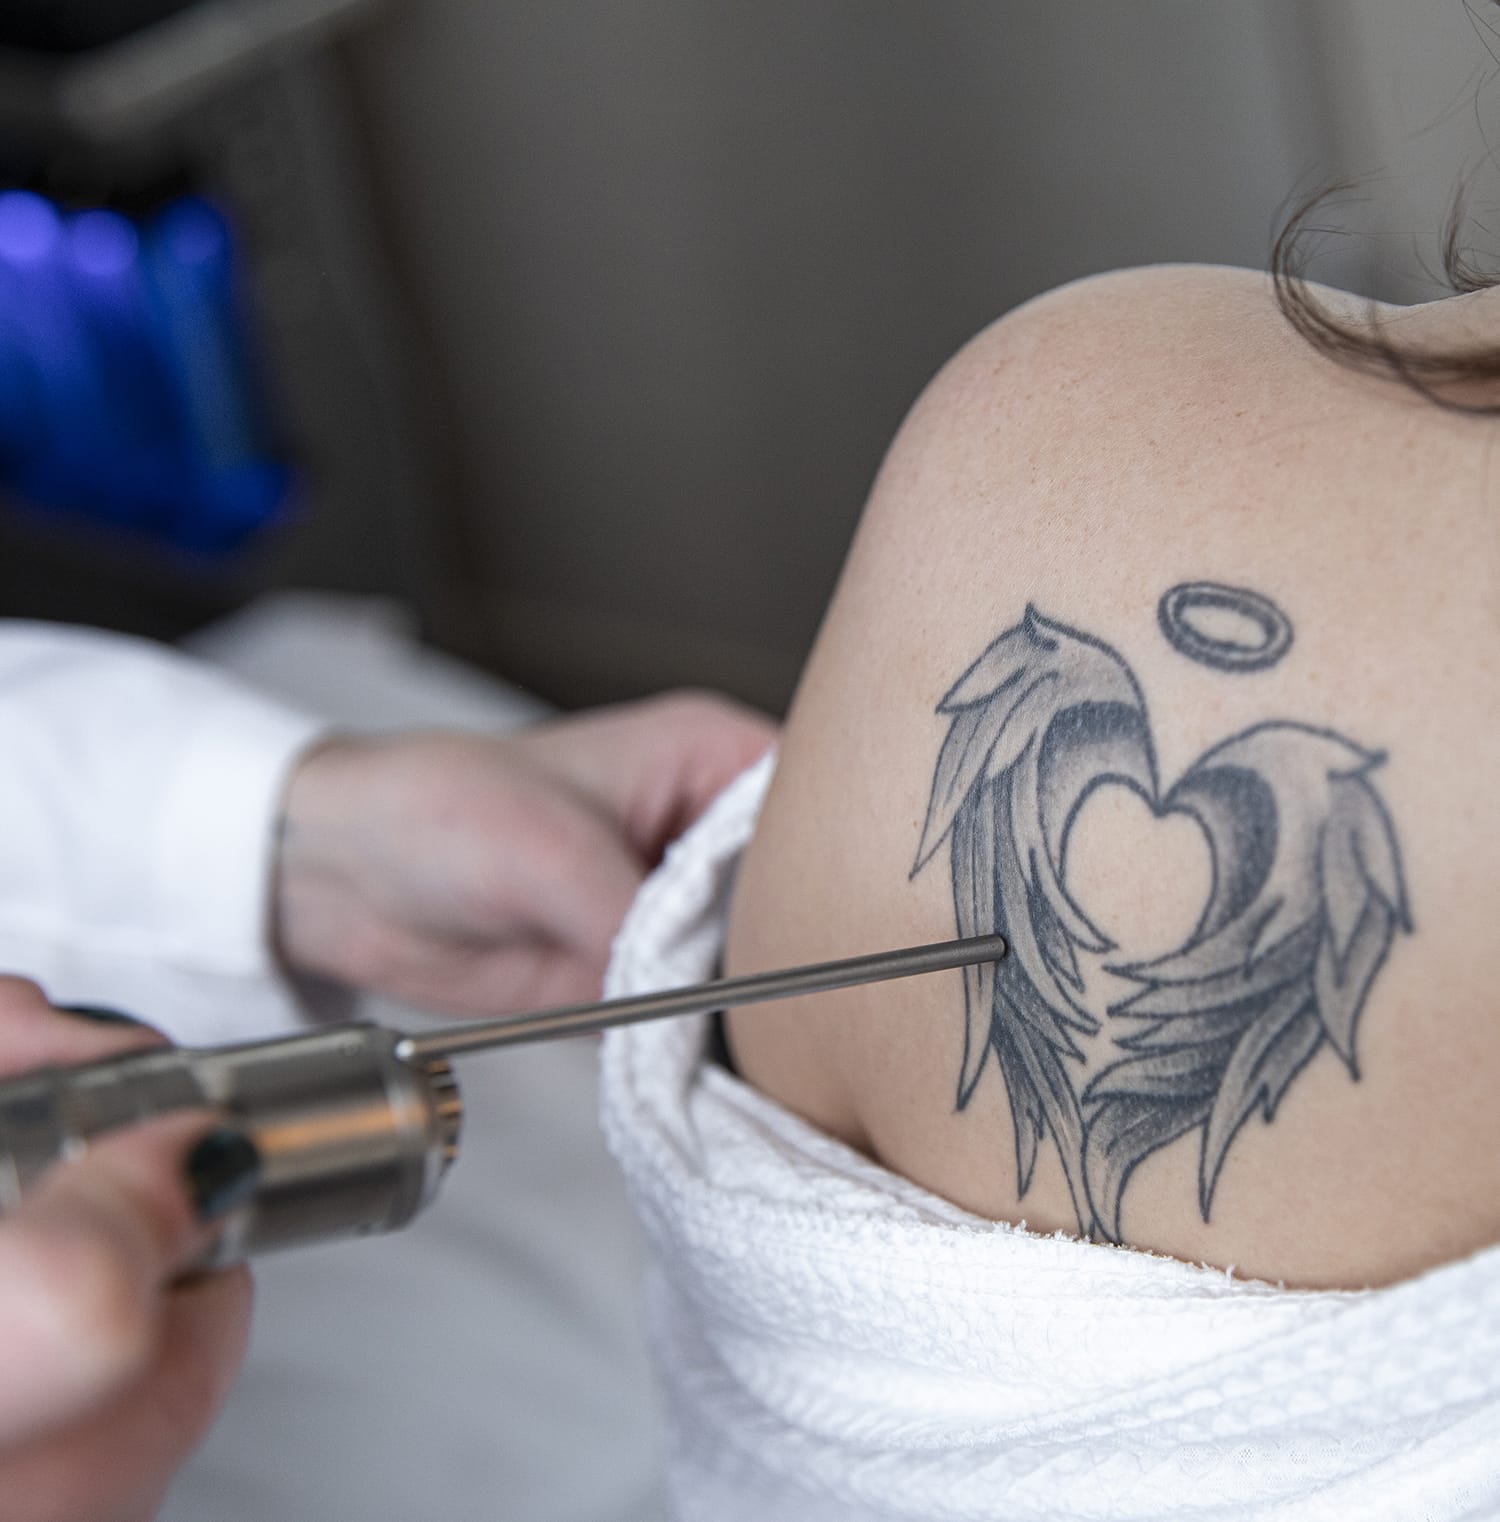 Tattoo Removal: From Pain to Cost, What You Need to Know